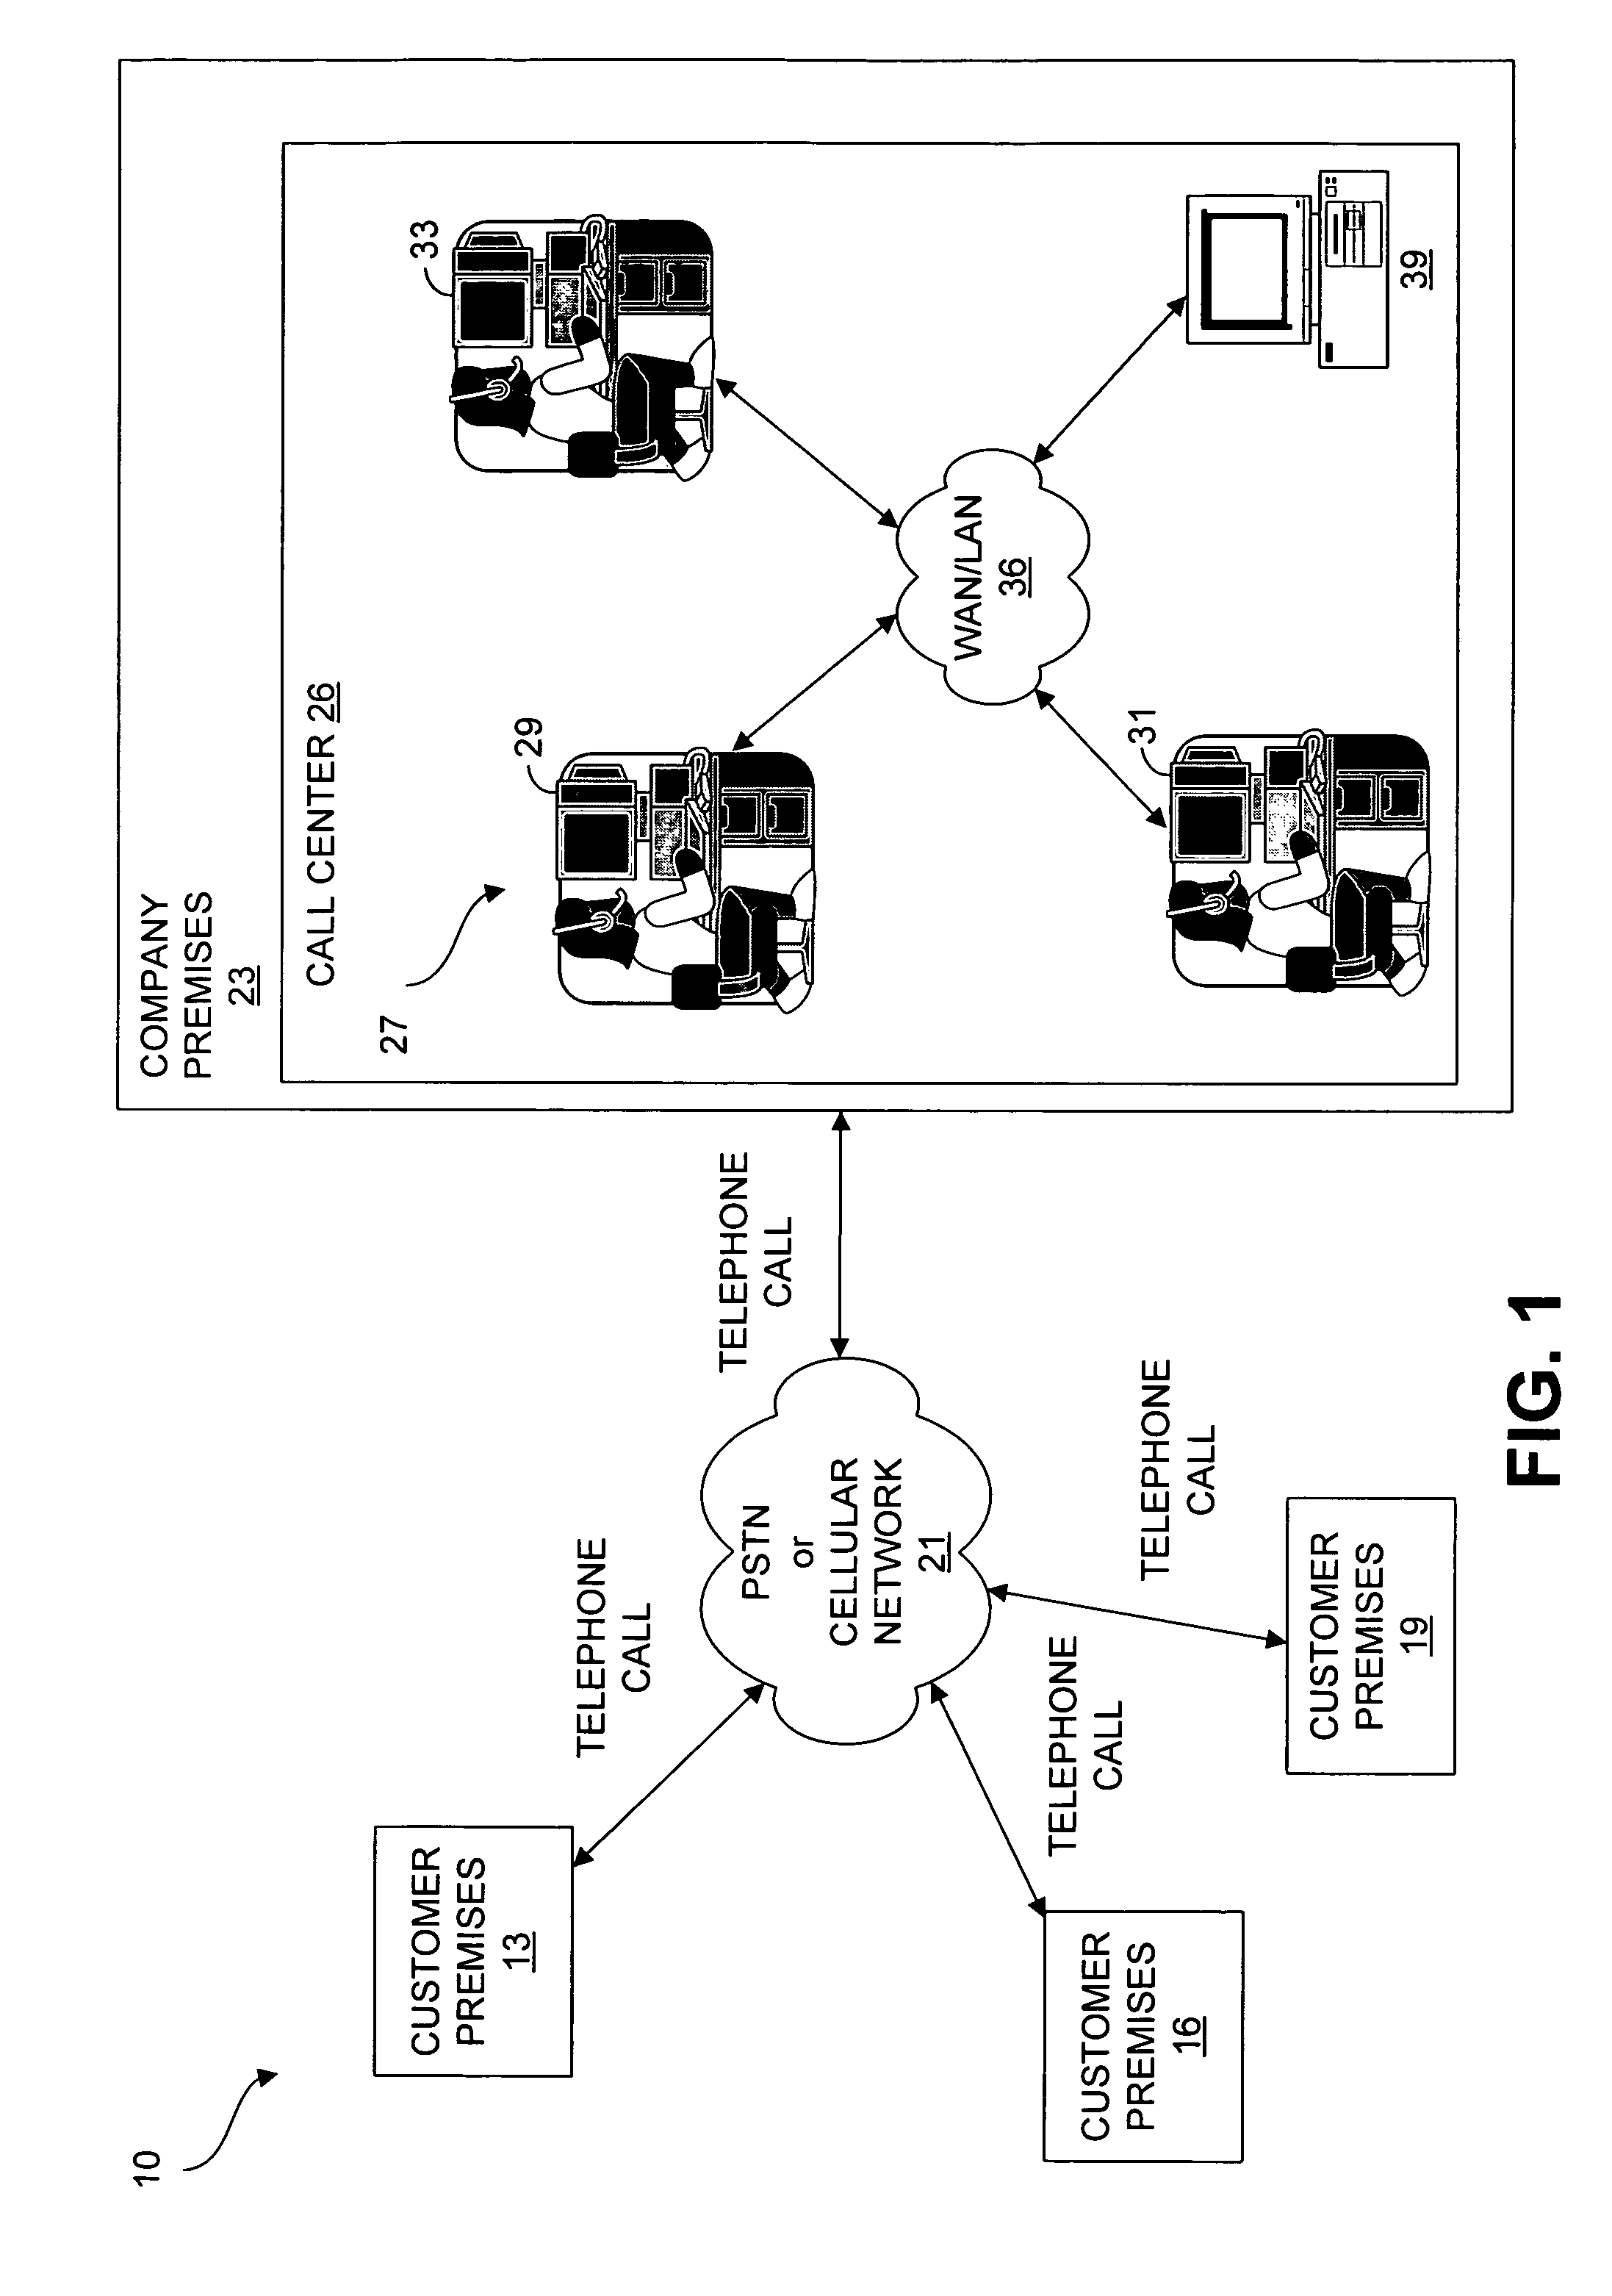 Systems and methods for scheduling call center agents using quality data and correlation-based discovery